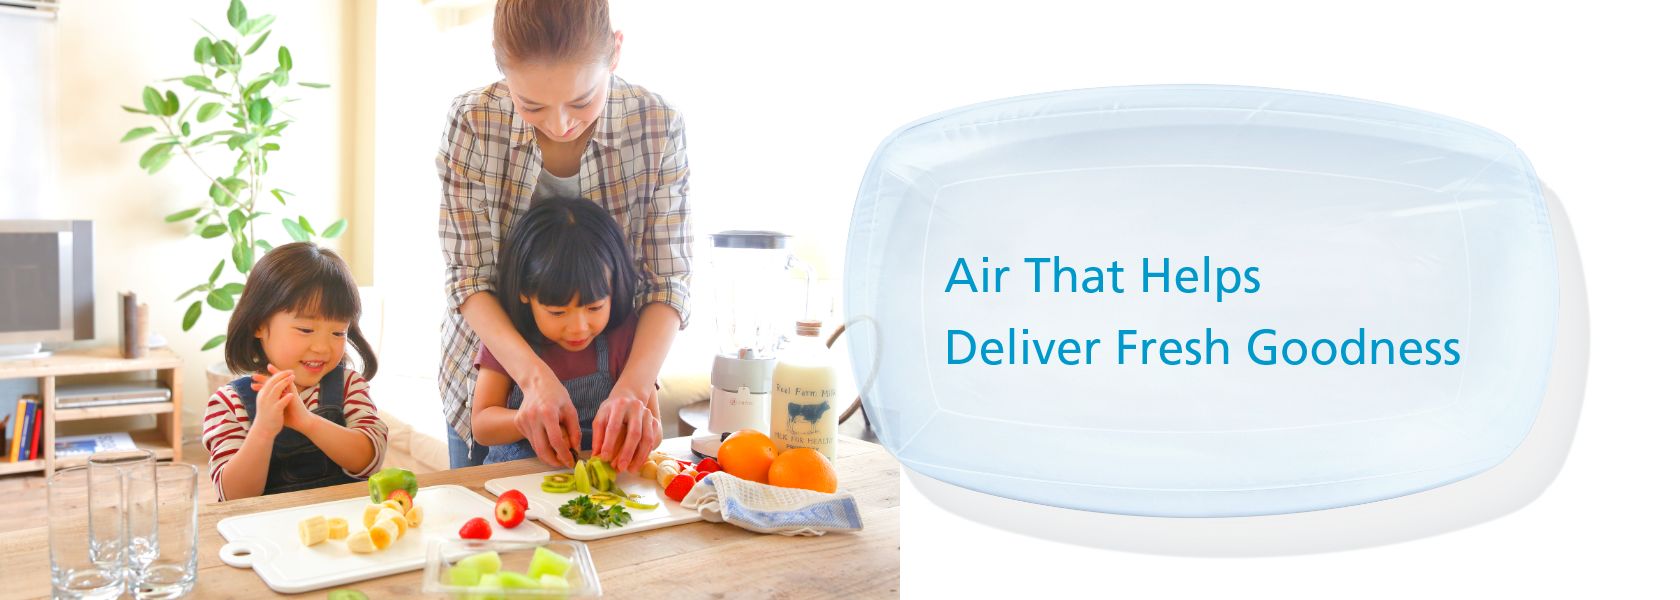 Air That Helps Deliver Fresh Goodness